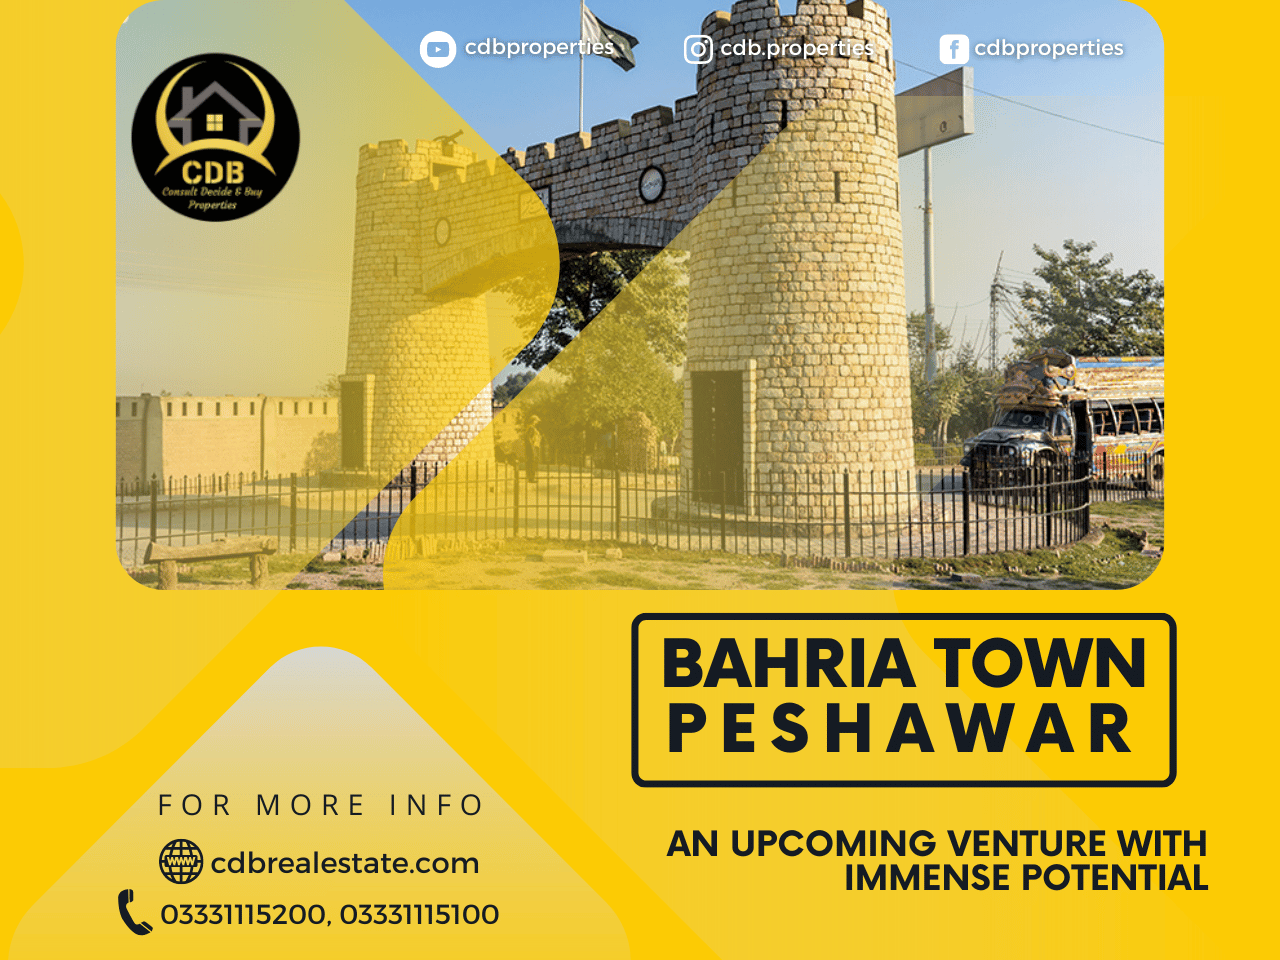 Bahria Town Peshawar An Upcoming Venture with Immense Potential